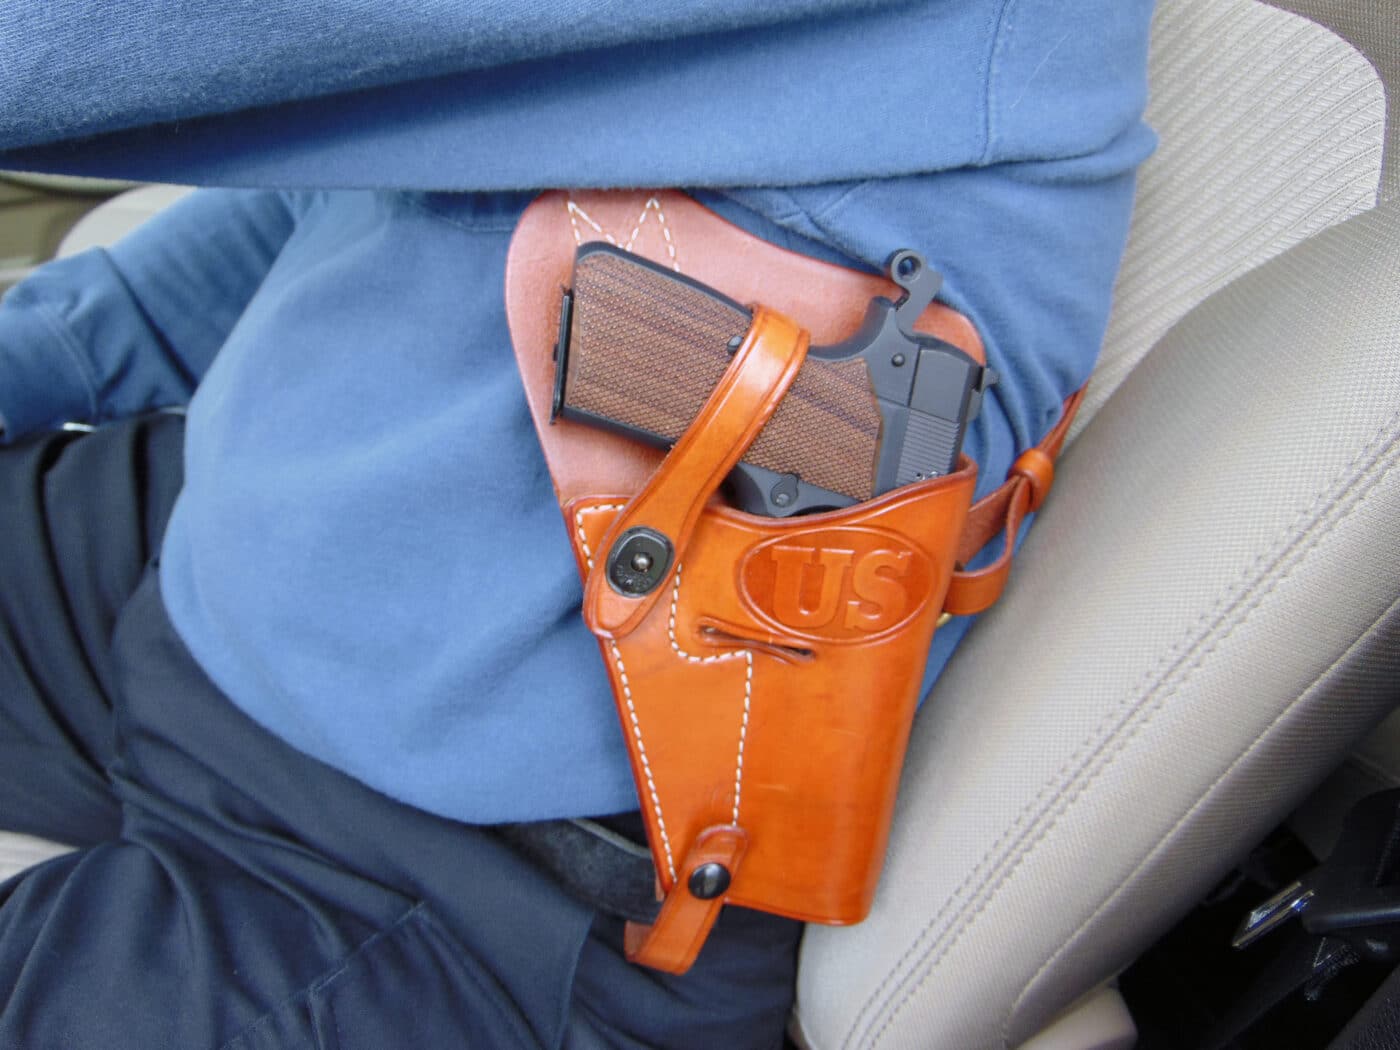 carrying the SA-35 in a shoulder holster in a car